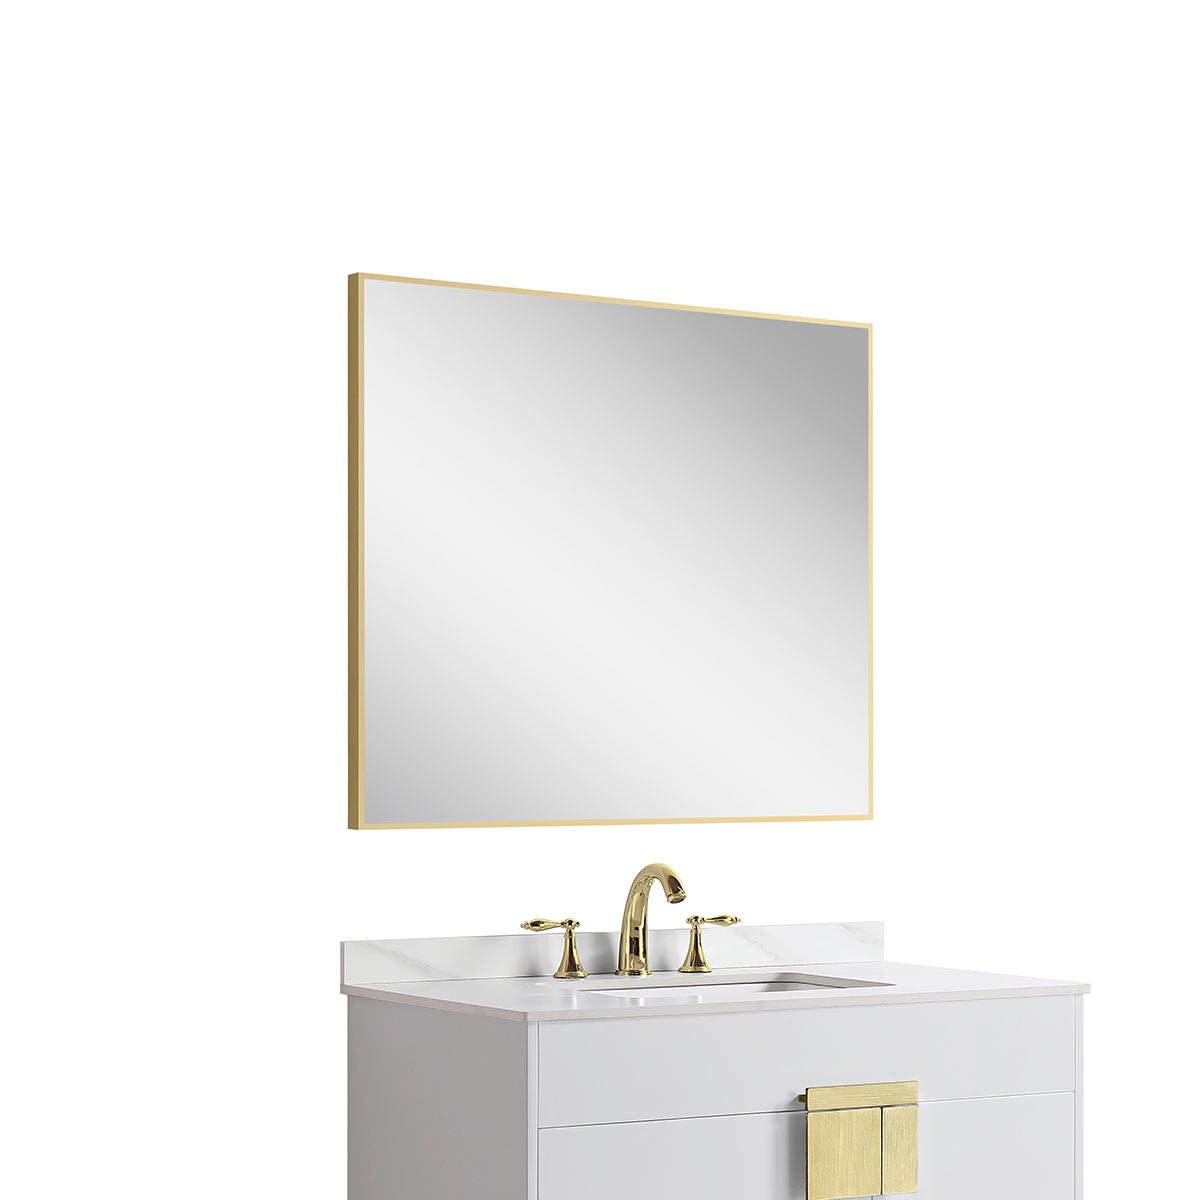 36"w x 32"h Aluminum Rectangle Bathroom Wall Mirror (Brushed Gold) - iStyle Bath